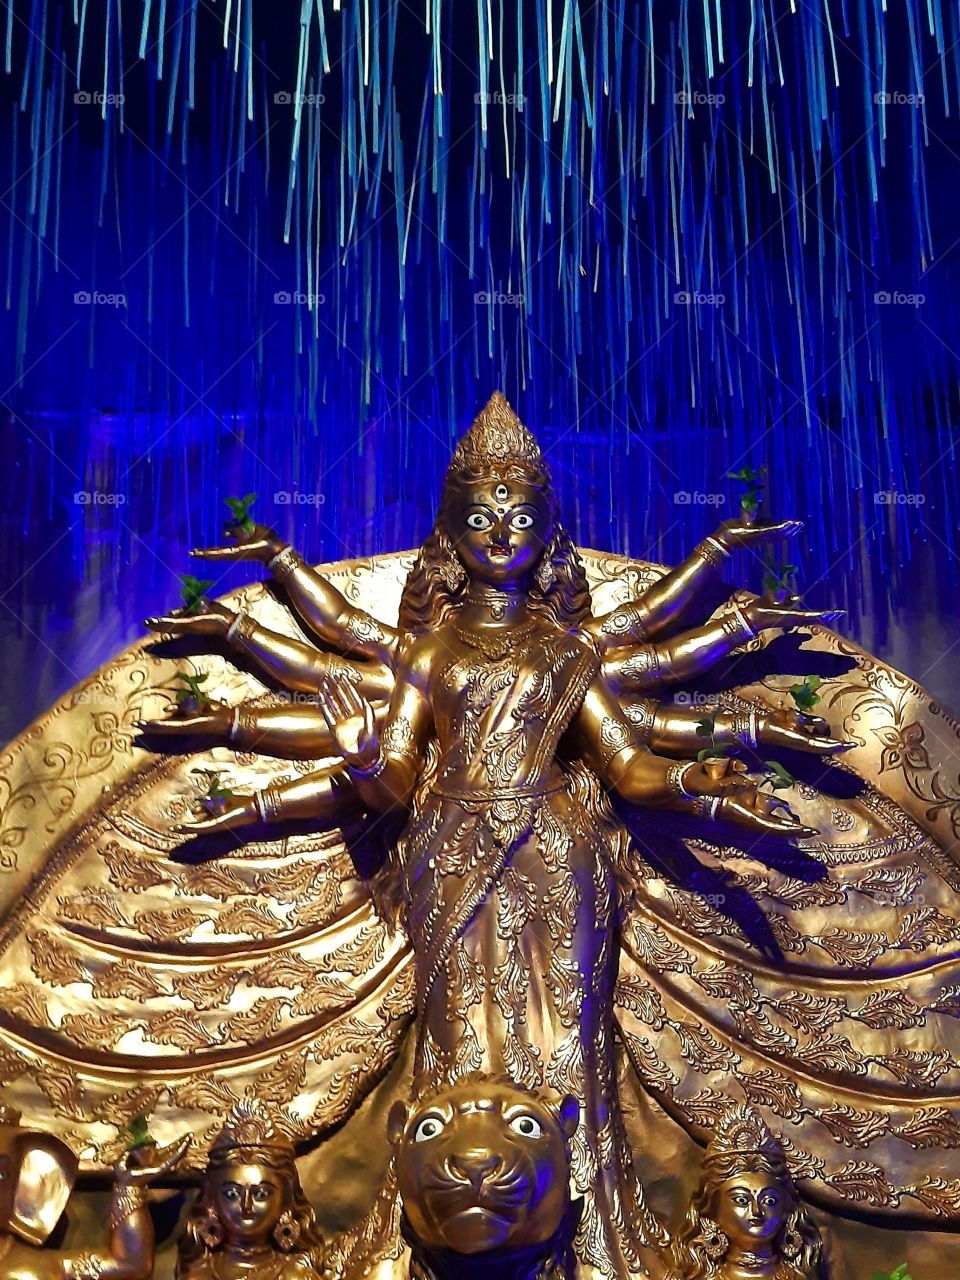 Captured a beautiful and exotic image of Goddess Durga idol, with an eye catching Light effects on it.